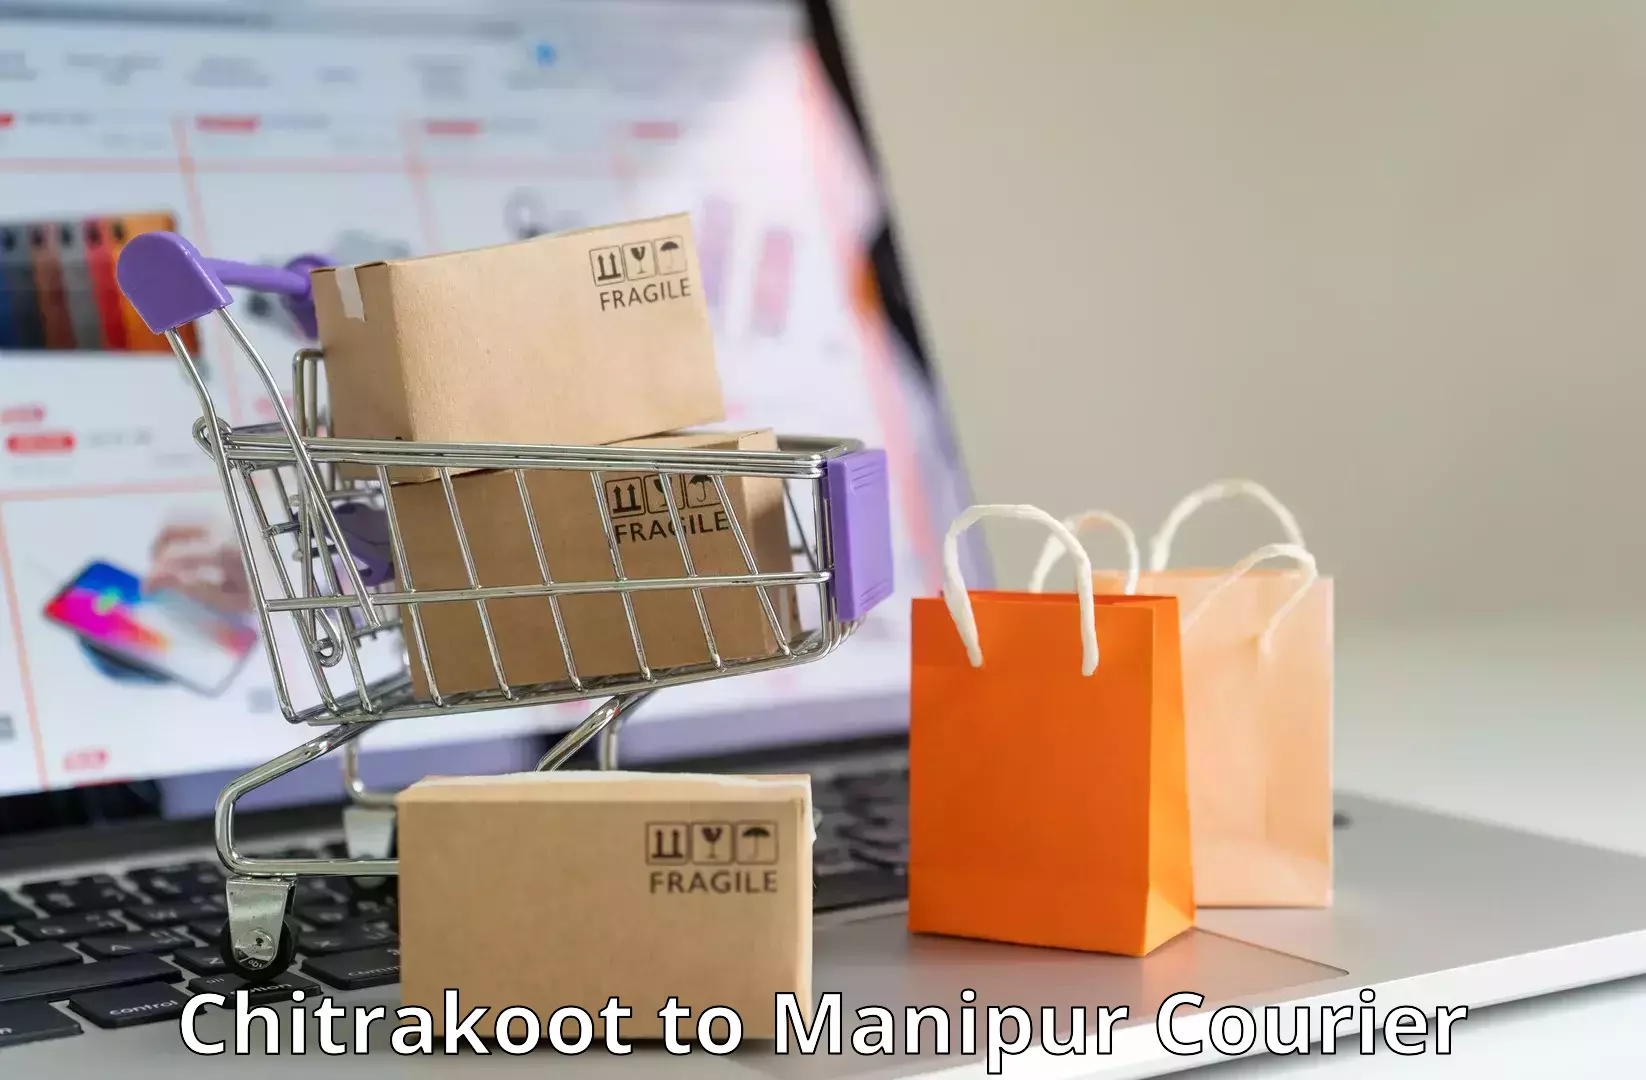 Business shipping needs Chitrakoot to Manipur